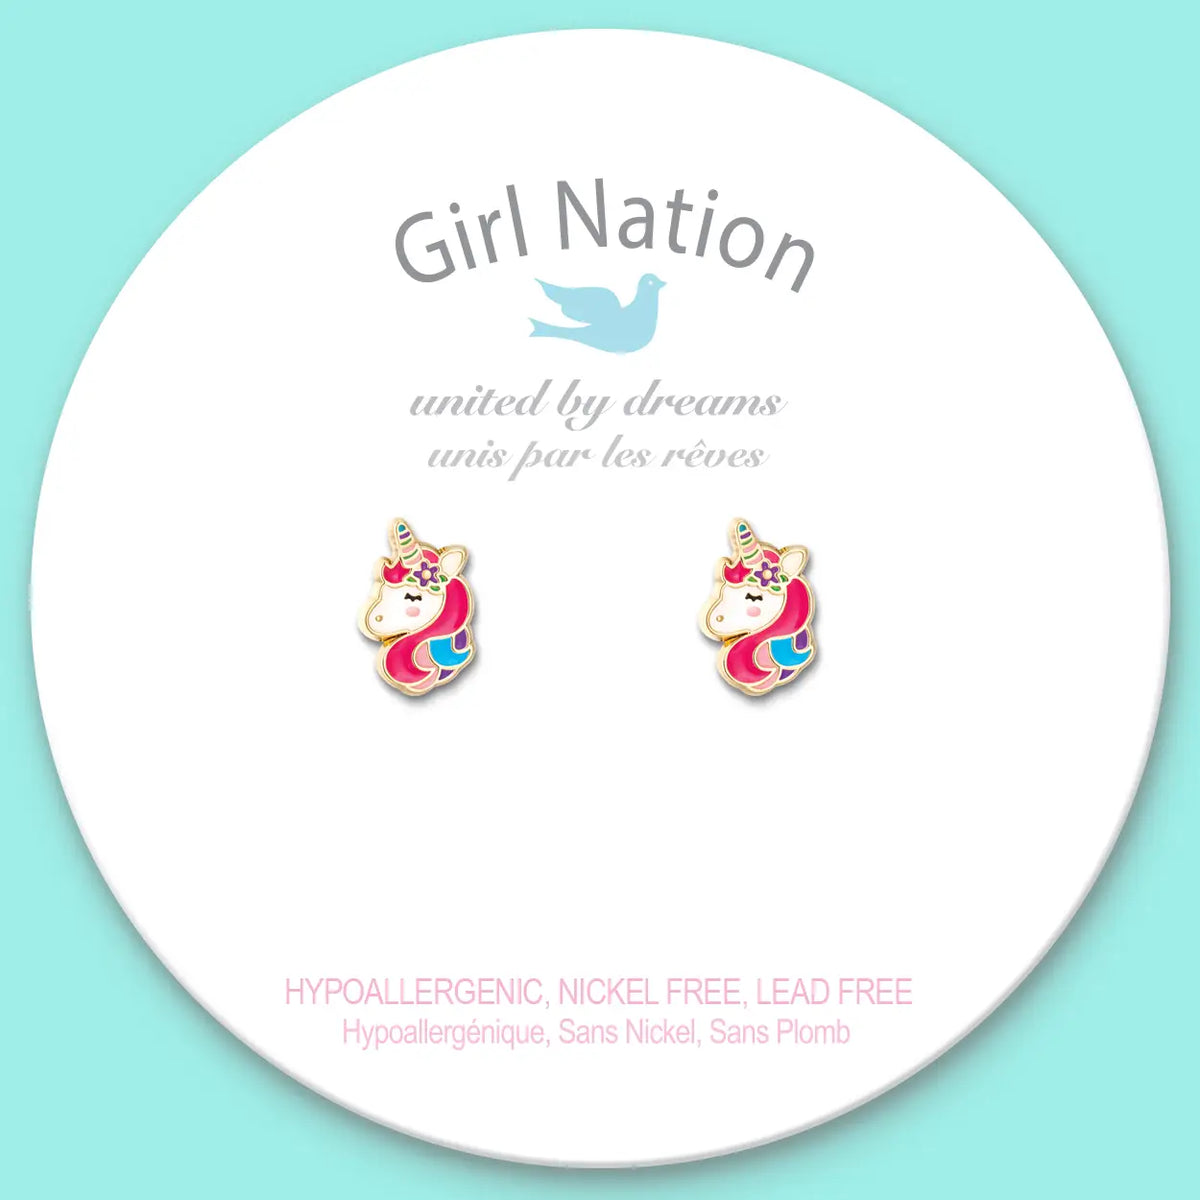 Girl Nation Products - Girl Nation